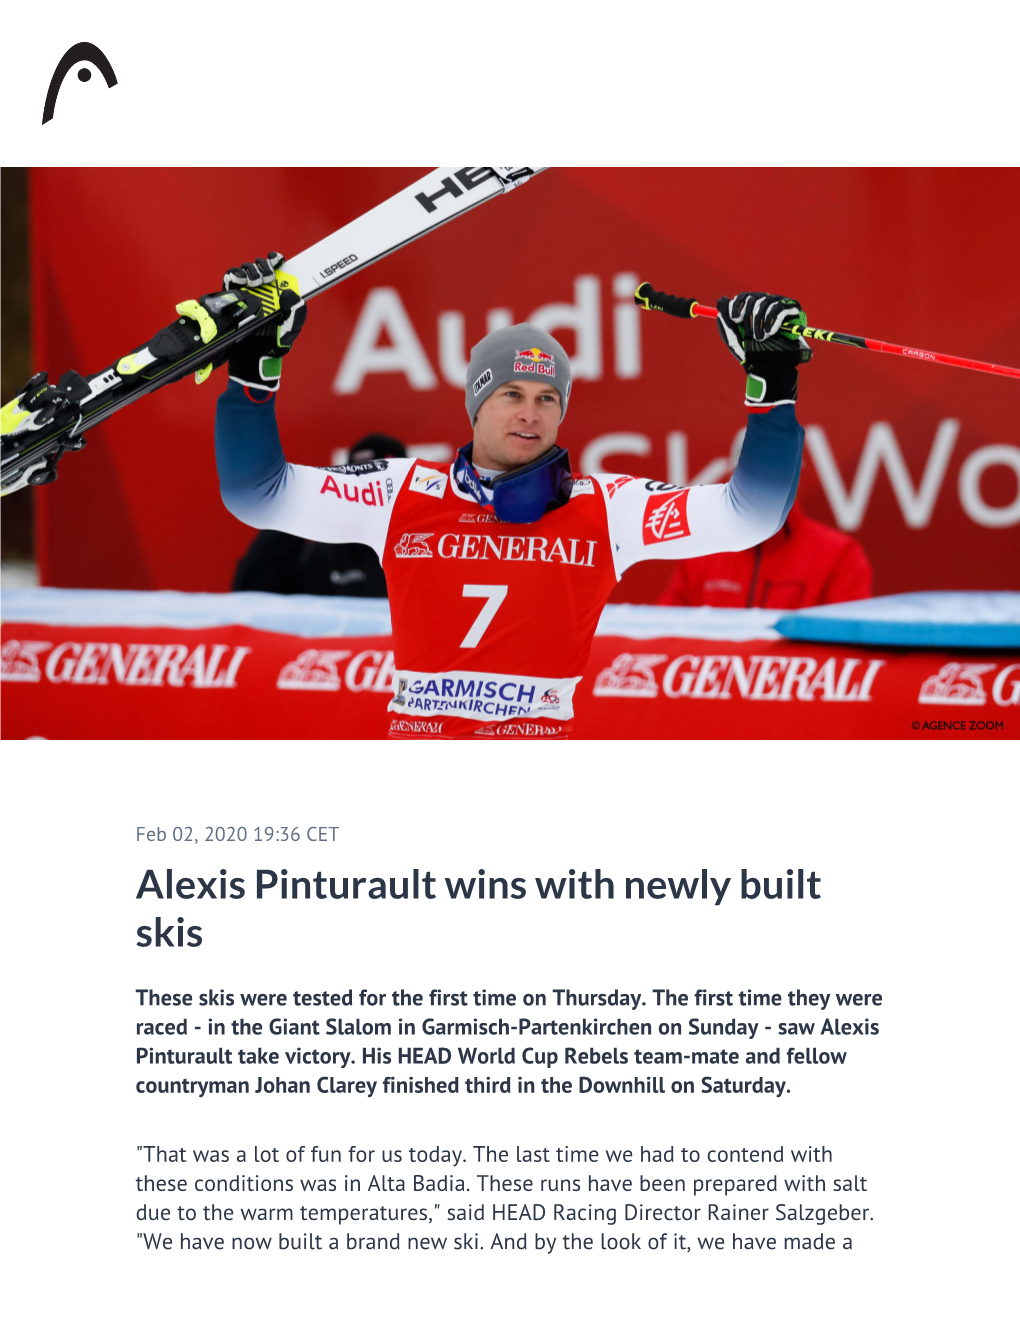 Alexis Pinturault Wins with Newly Built Skis